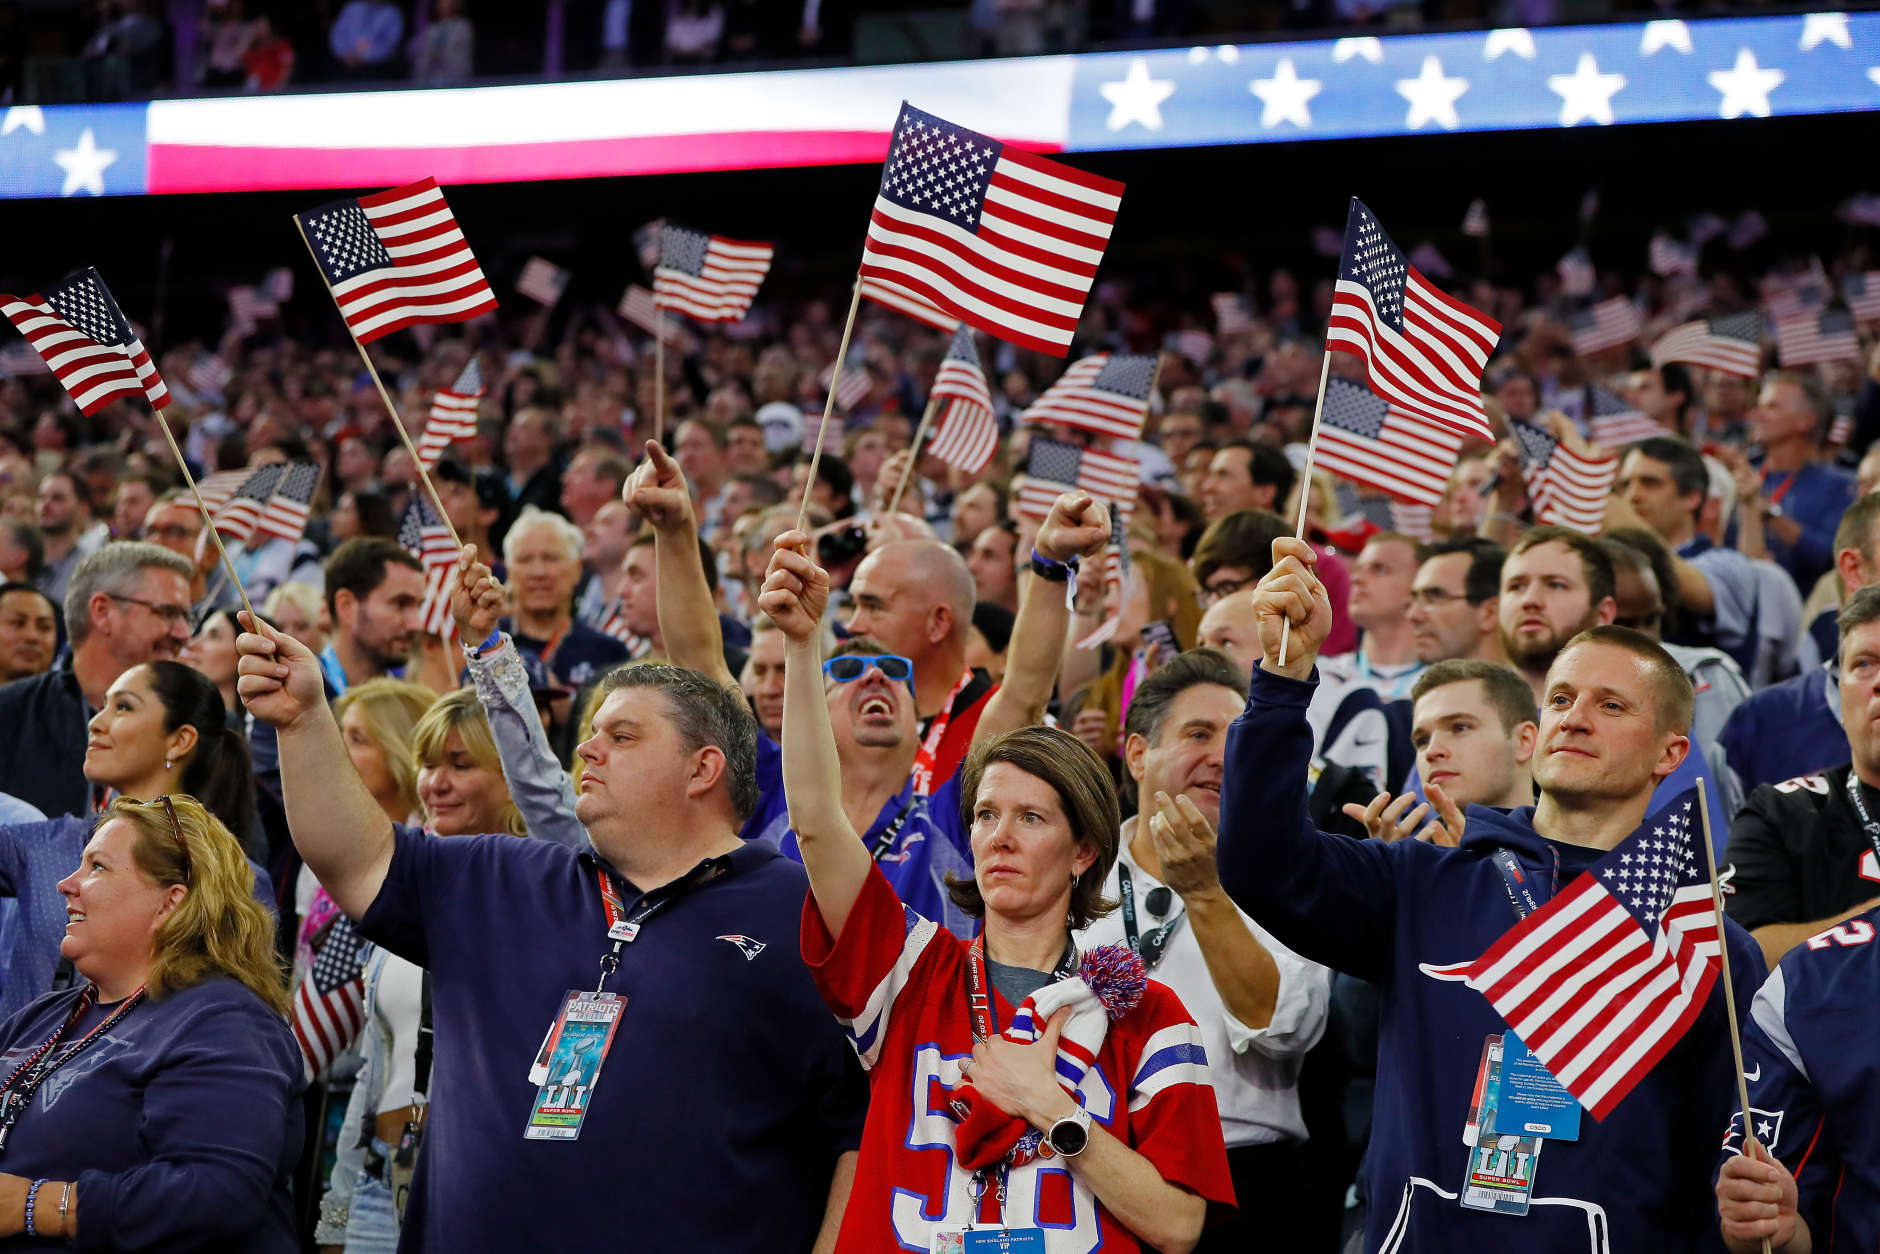 HOUSTON, TX - FEBRUARY 05:  Fans wave American Flags during the National Anthem prior to Super Bowl 51 between the Atlanta Falcons and the New England Patriots at NRG Stadium on February 5, 2017 in Houston, Texas.  (Photo by Kevin C. Cox/Getty Images)